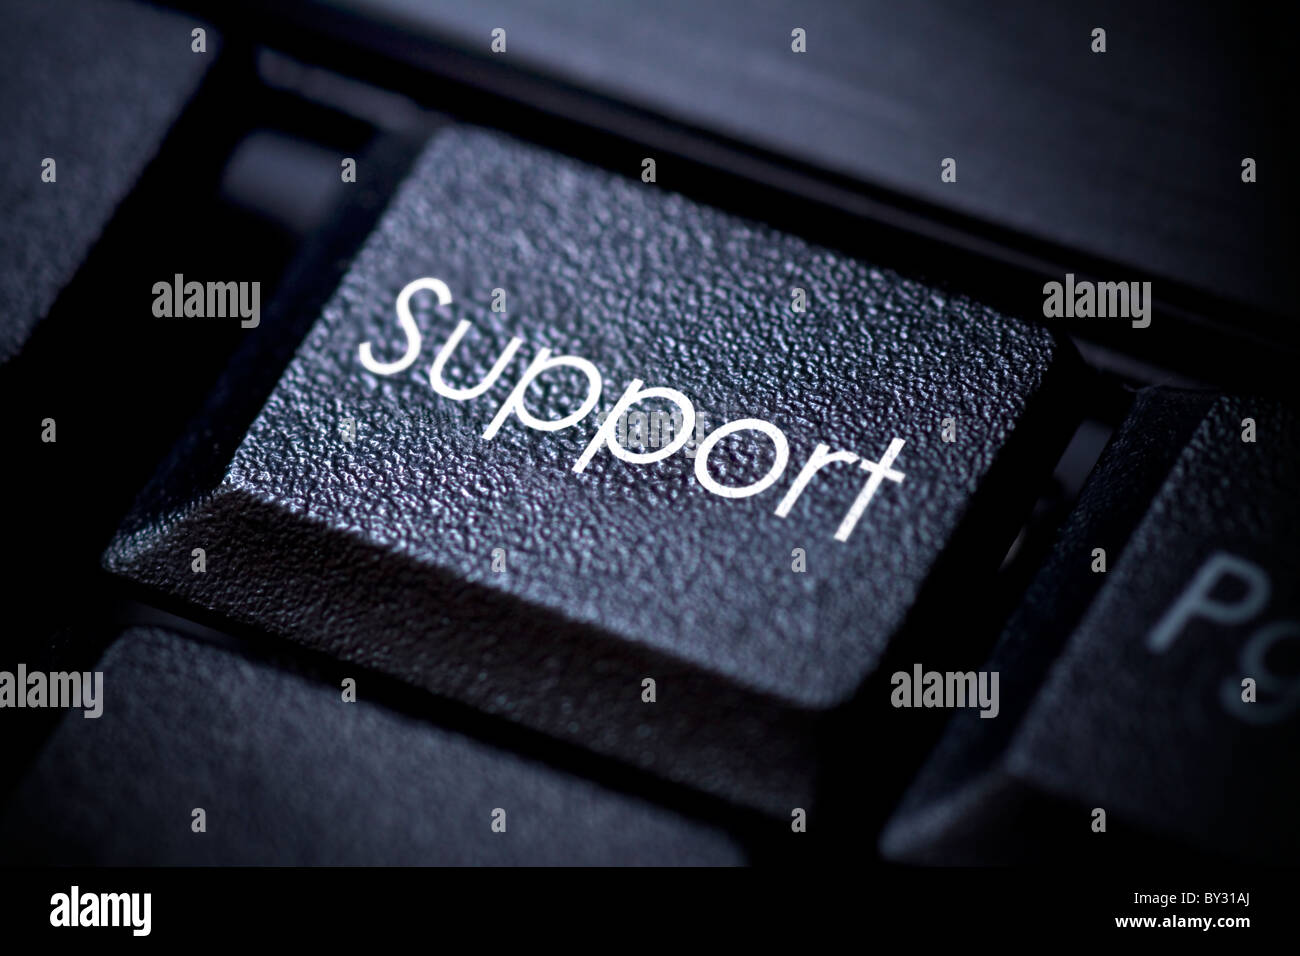 Computer keyboard concept Image. Support button. Stock Photo